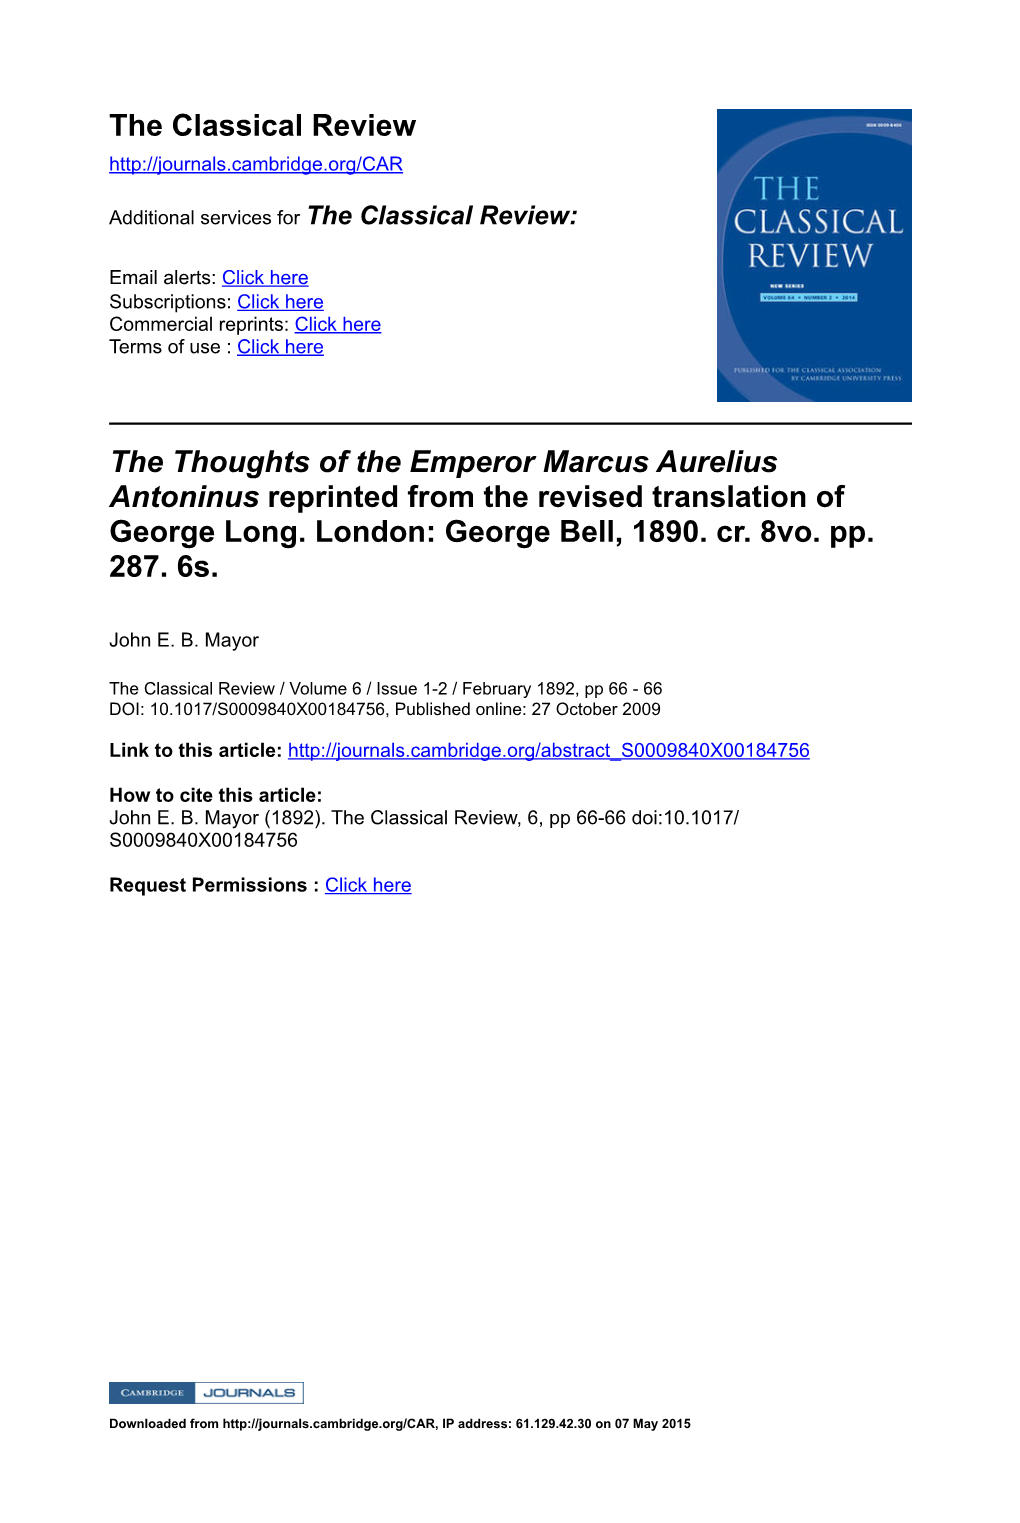 The Thoughts of the Emperor Marcus Aurelius Antoninus Reprinted from the Revised Translation of George Long